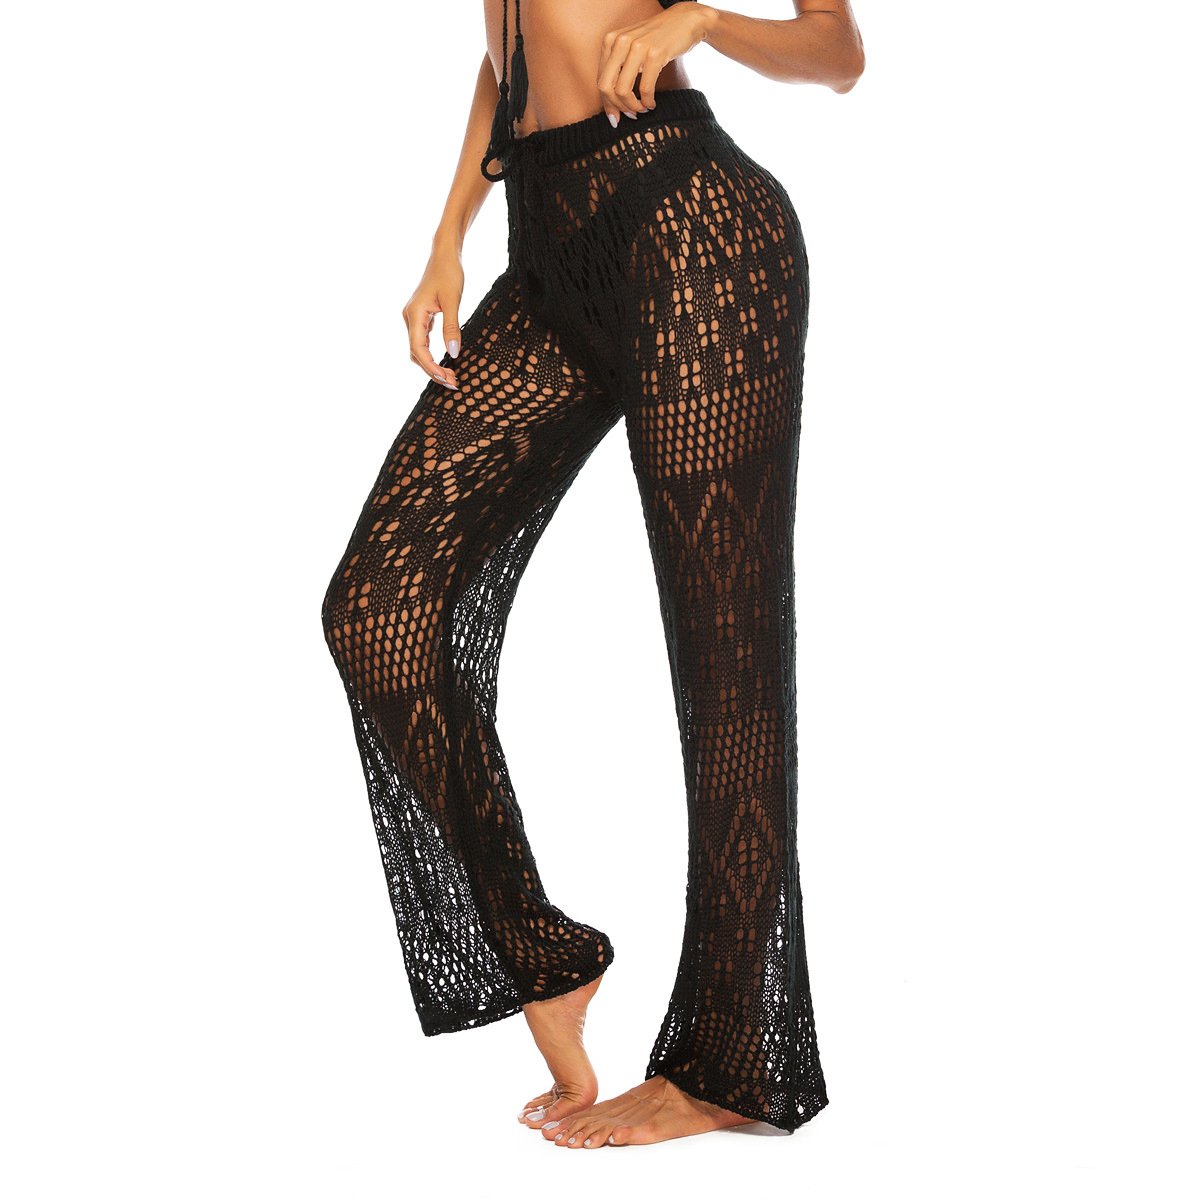 Sexy Women See Through Summer Beach Pants-Black-One Size-Free Shipping at meselling99